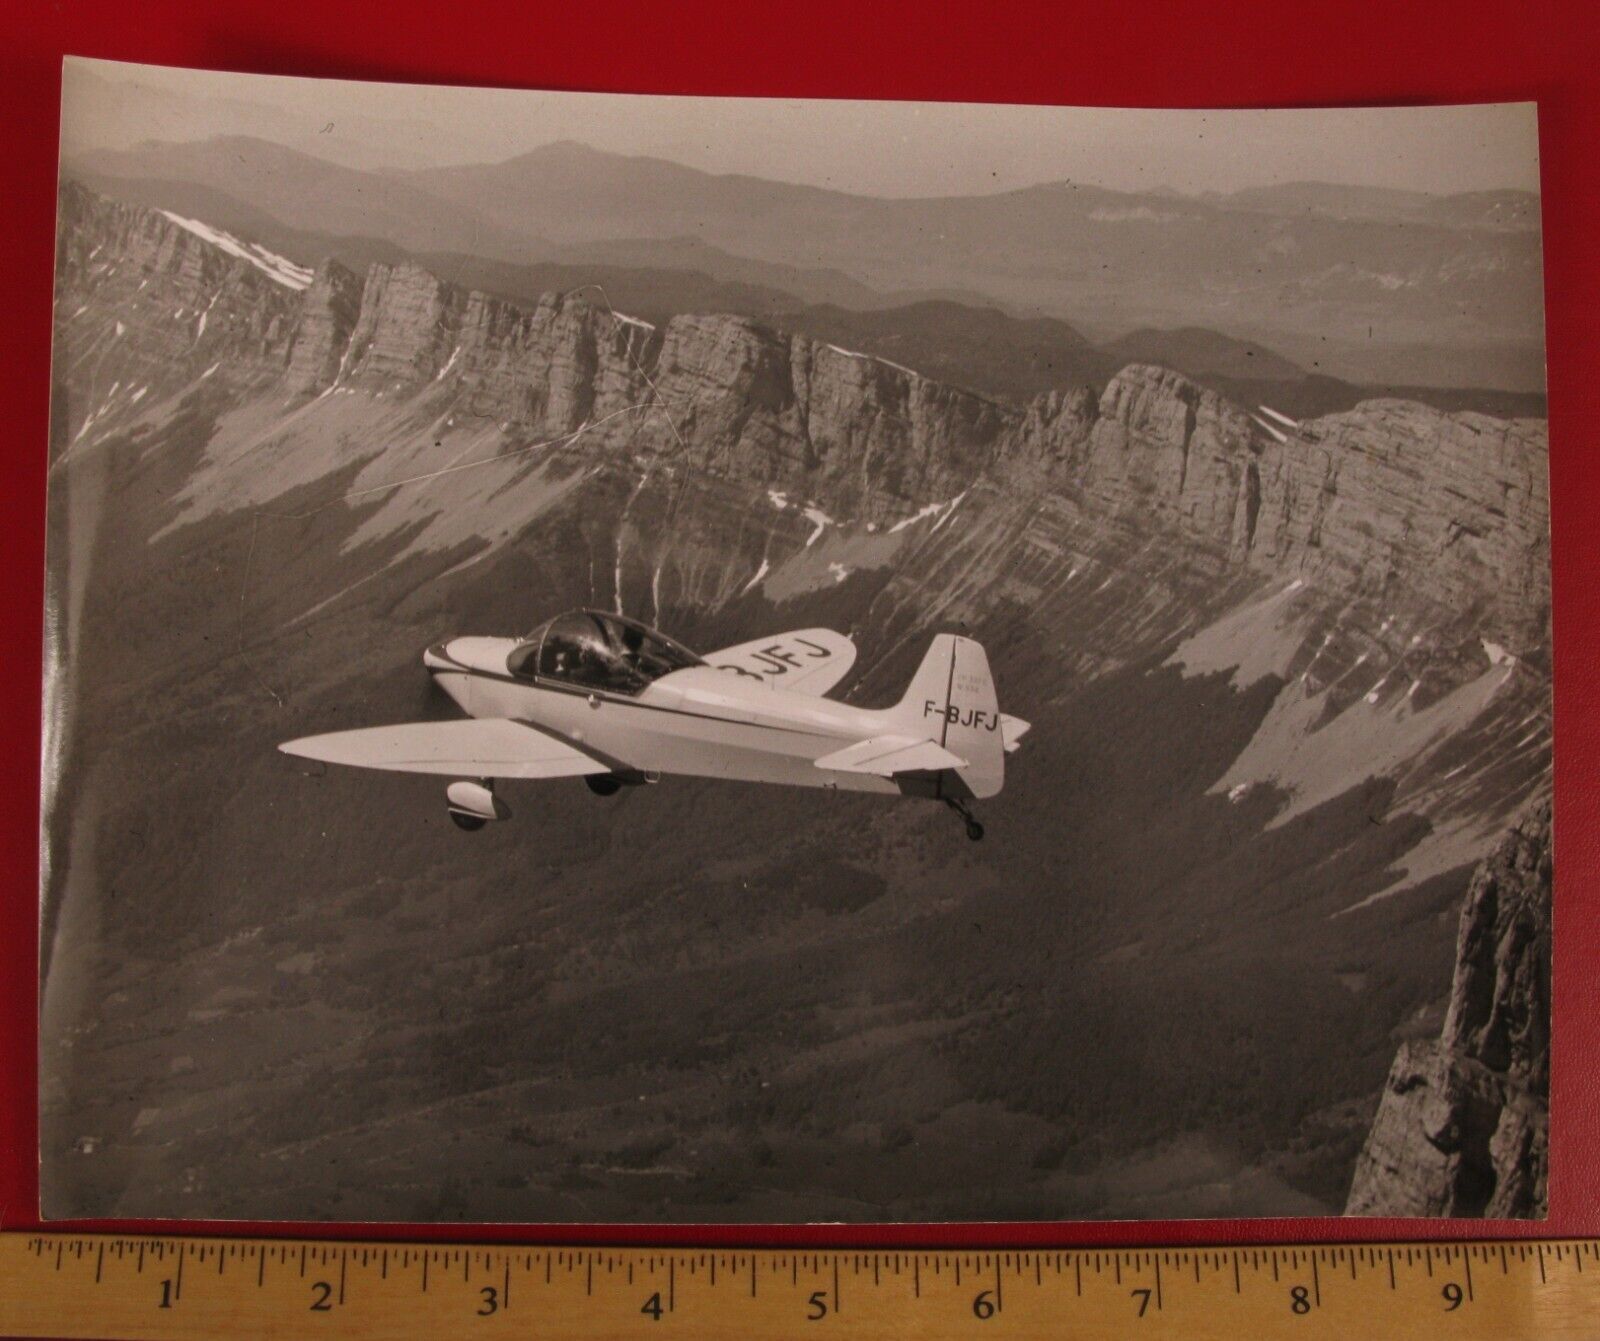 VINTAGE PHOTOGRAPH PHOTO AIRPLANE AIRCRAFT SINGLE PILOT FLYING OVER CANYON 